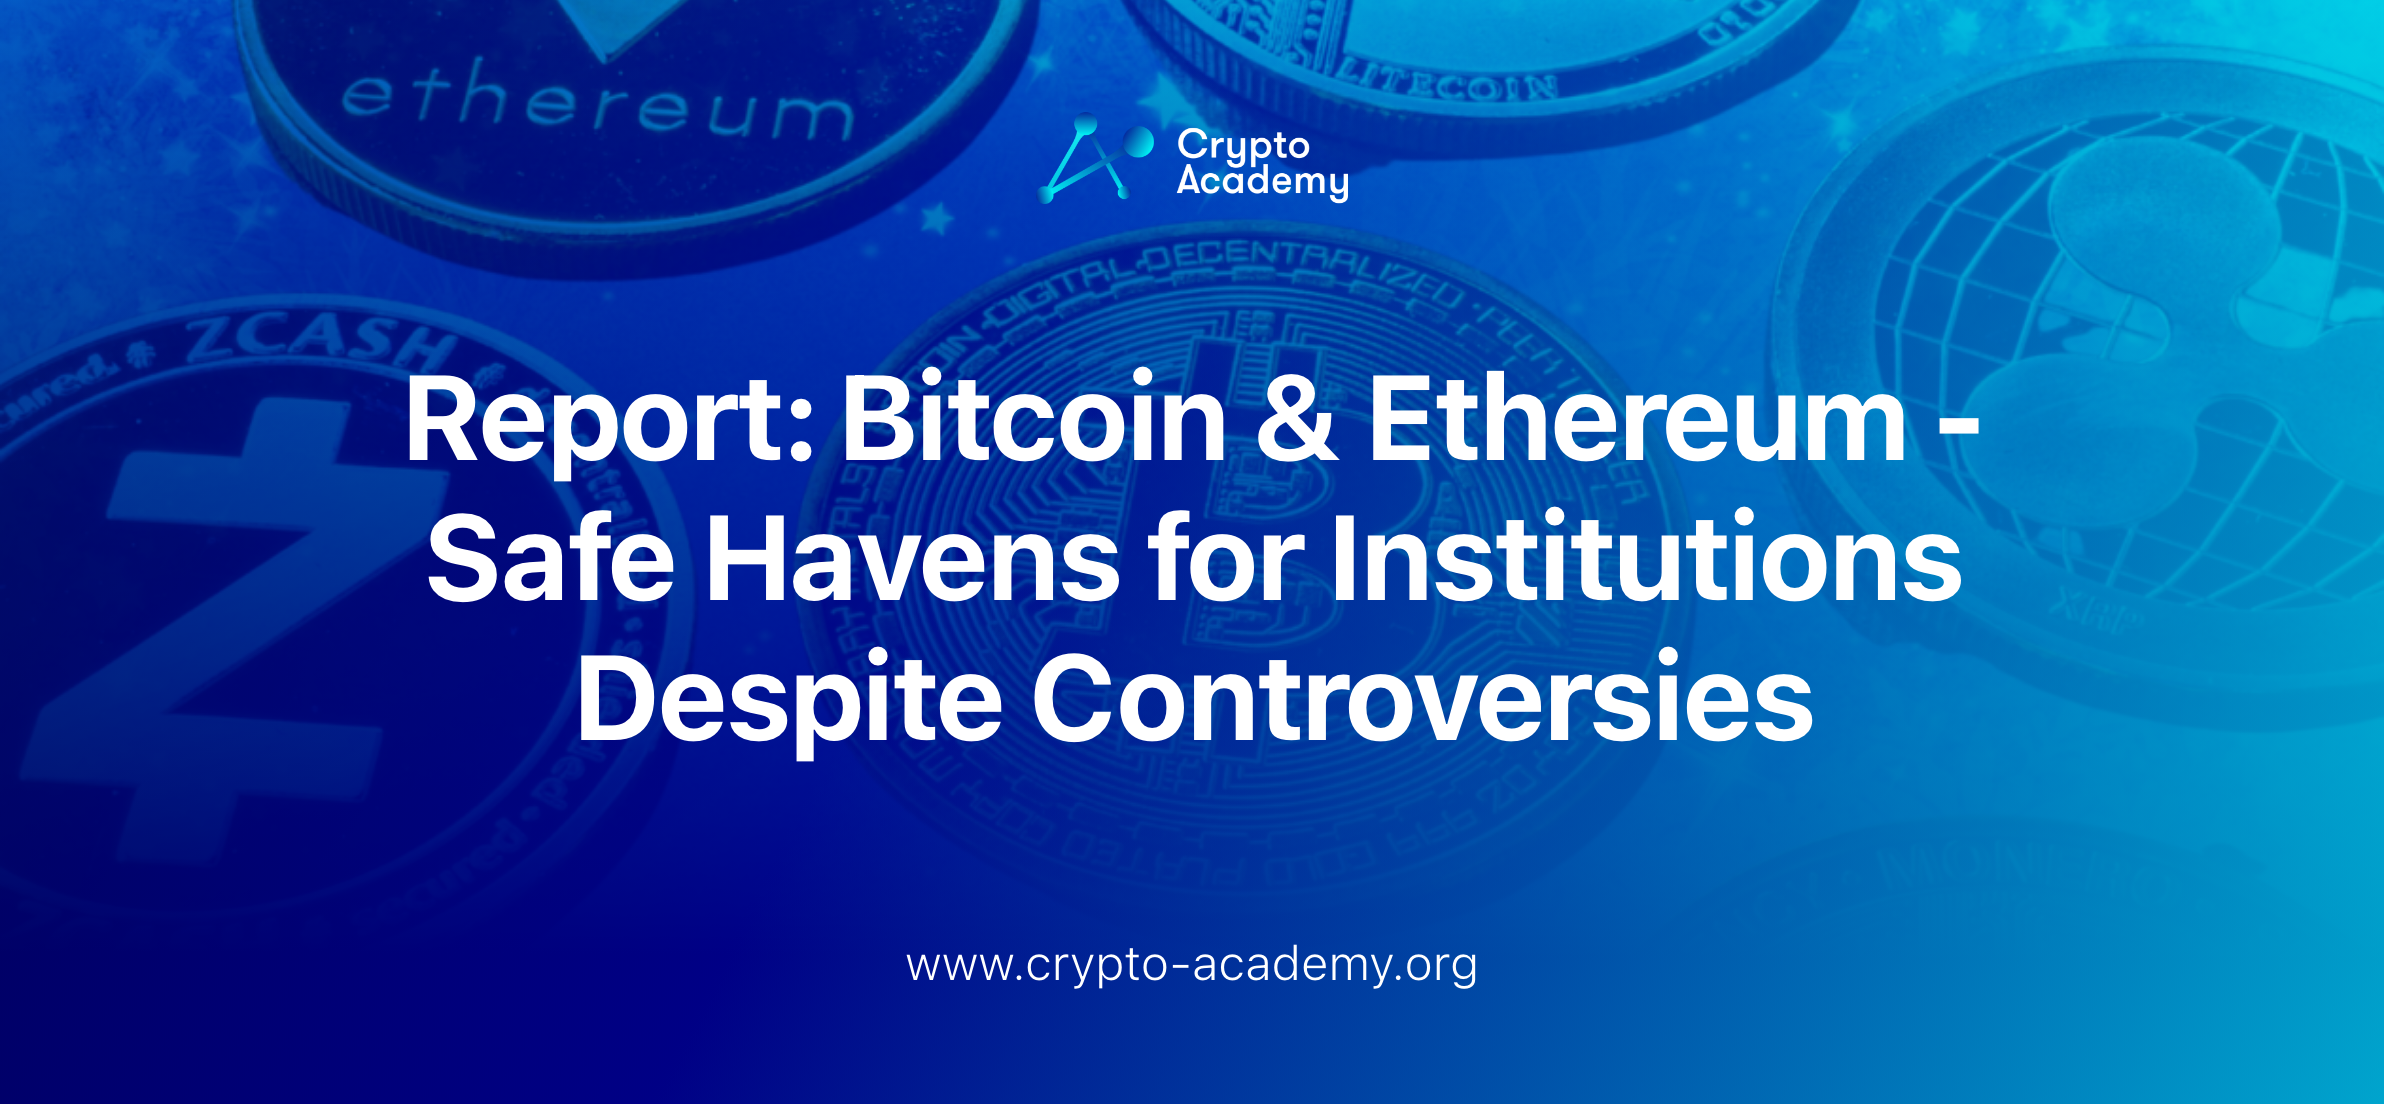 Bitcoin & Ethereum - Safe Havens for Institutions Despite Controversies